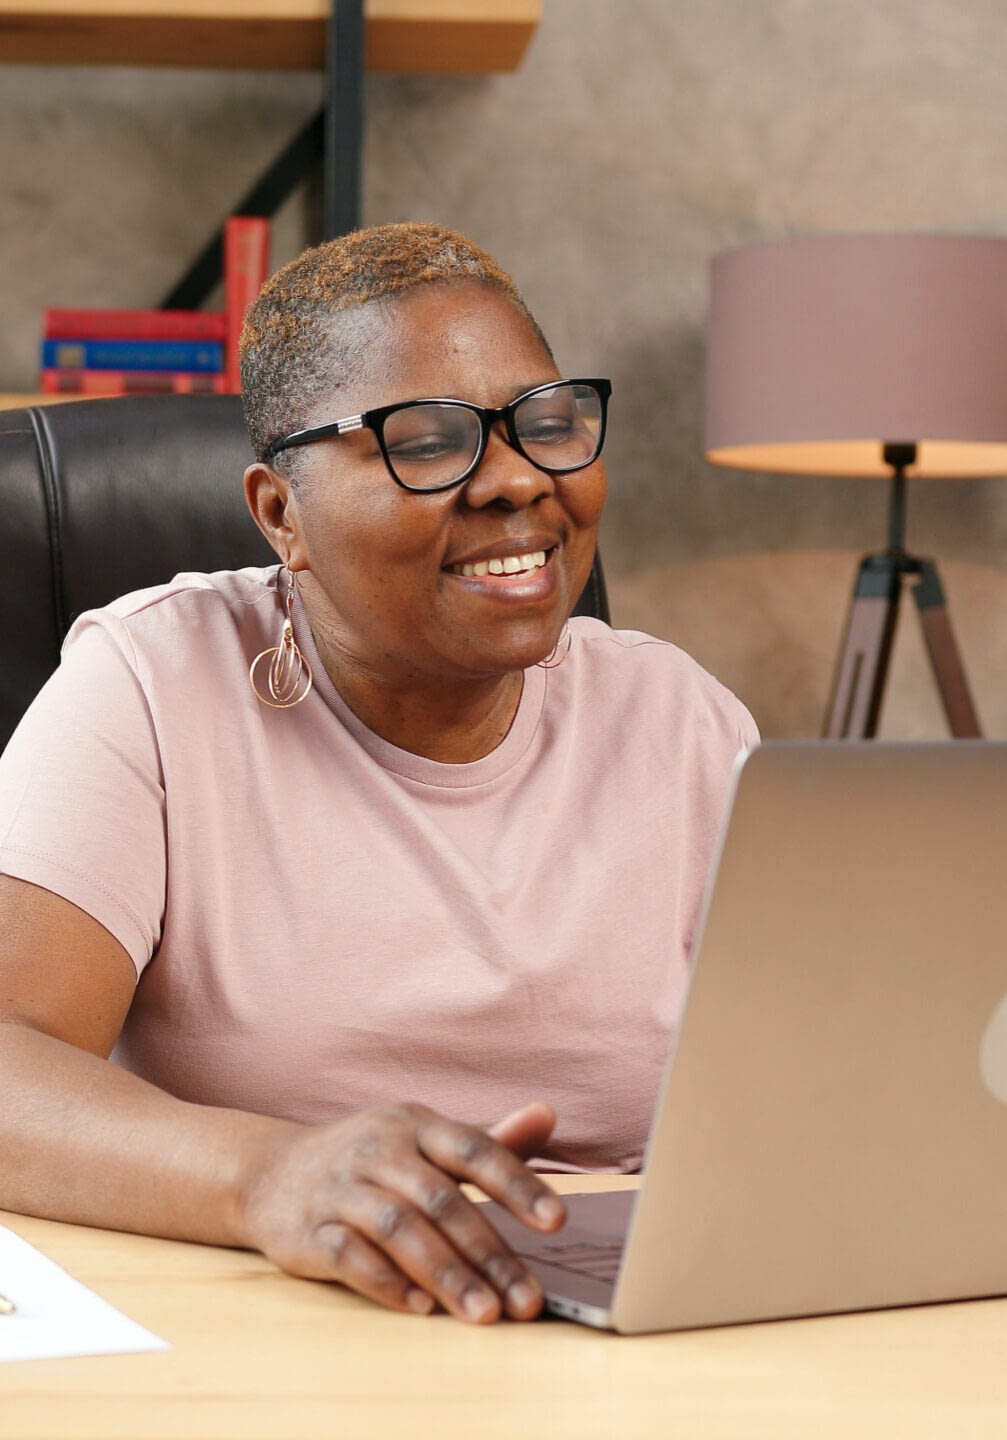 Decorative: a Black woman with a shaved head working on her laptop computer